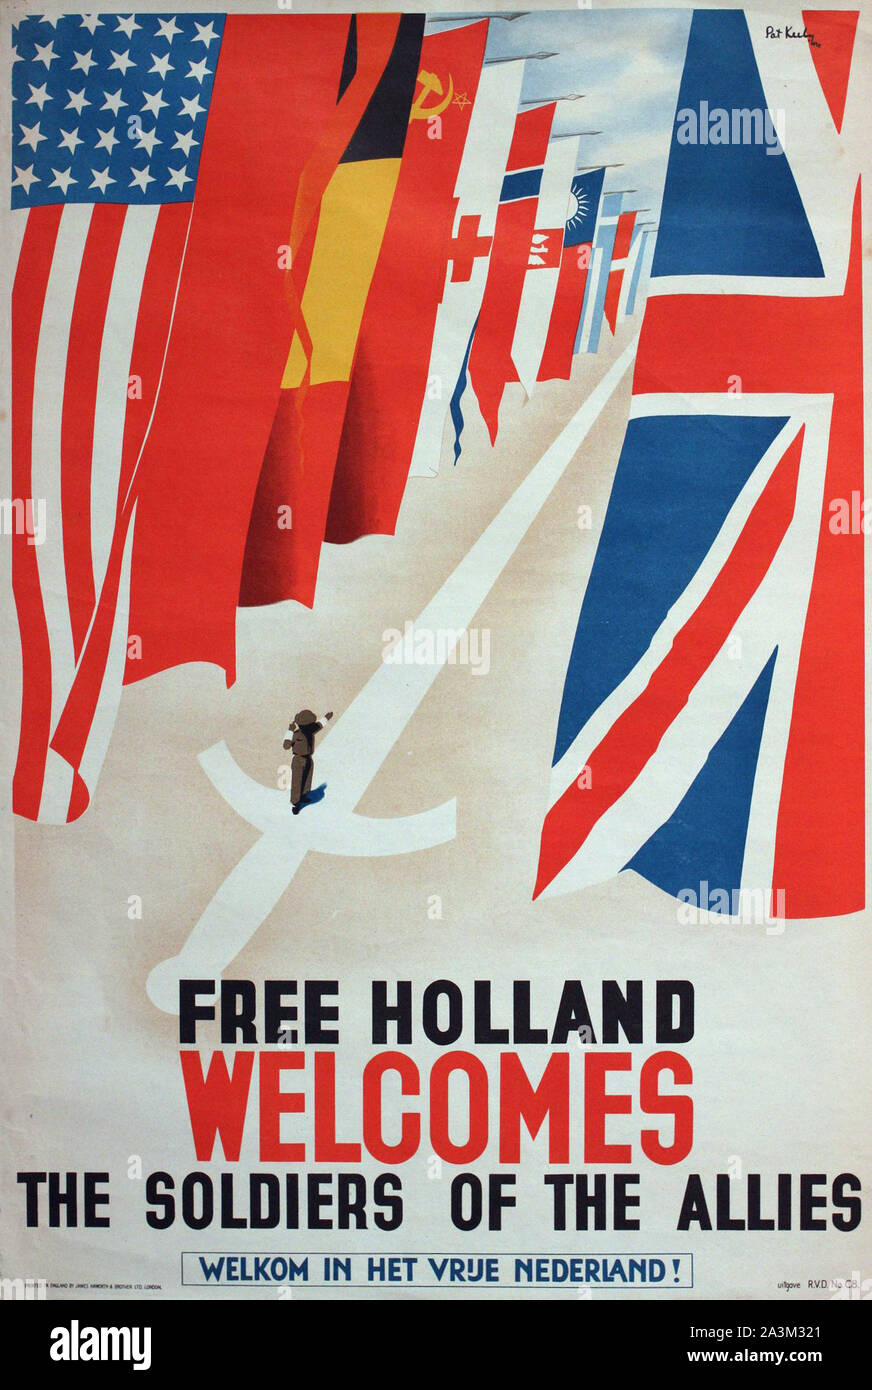 Free Holland Welcomes the Allies  - Vintage Propaganda poster Stock Photo